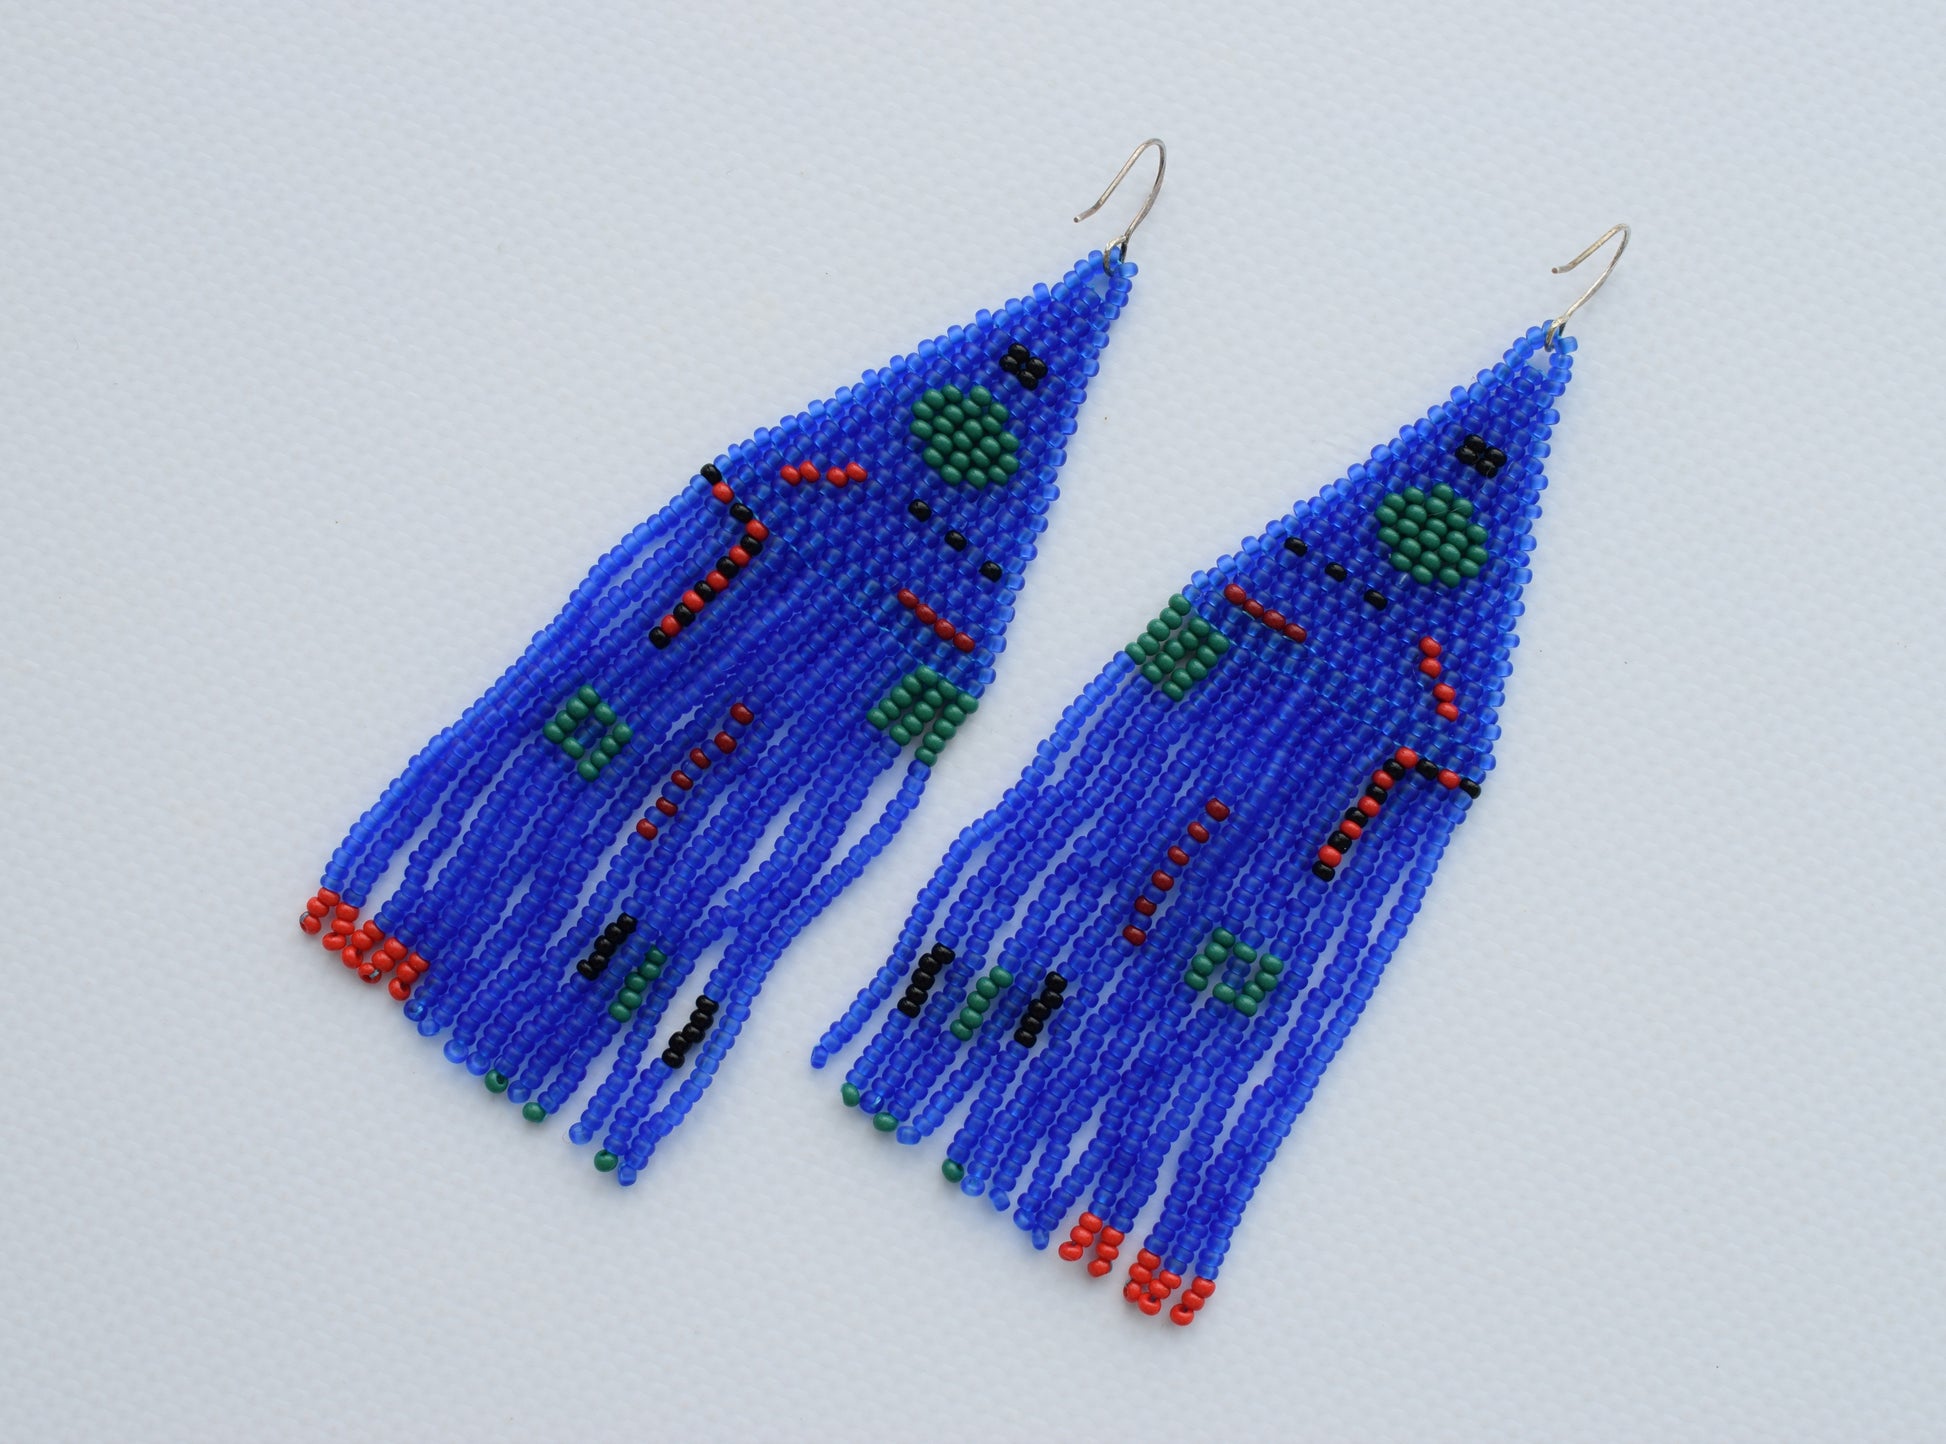 These are navy blue geometric beaded earrings. These beaded earrings are made of high-quality Czech beads. These earrings are long, delicate, colorful, fashionable and highly versatile, suitable for everyday wear.  Length (*with hooks) - 11 cm (4.3 inches). Width - 3.5 cm (1.3 inches)  If you have any questions just write me a message. I am always in touch and reply asap!